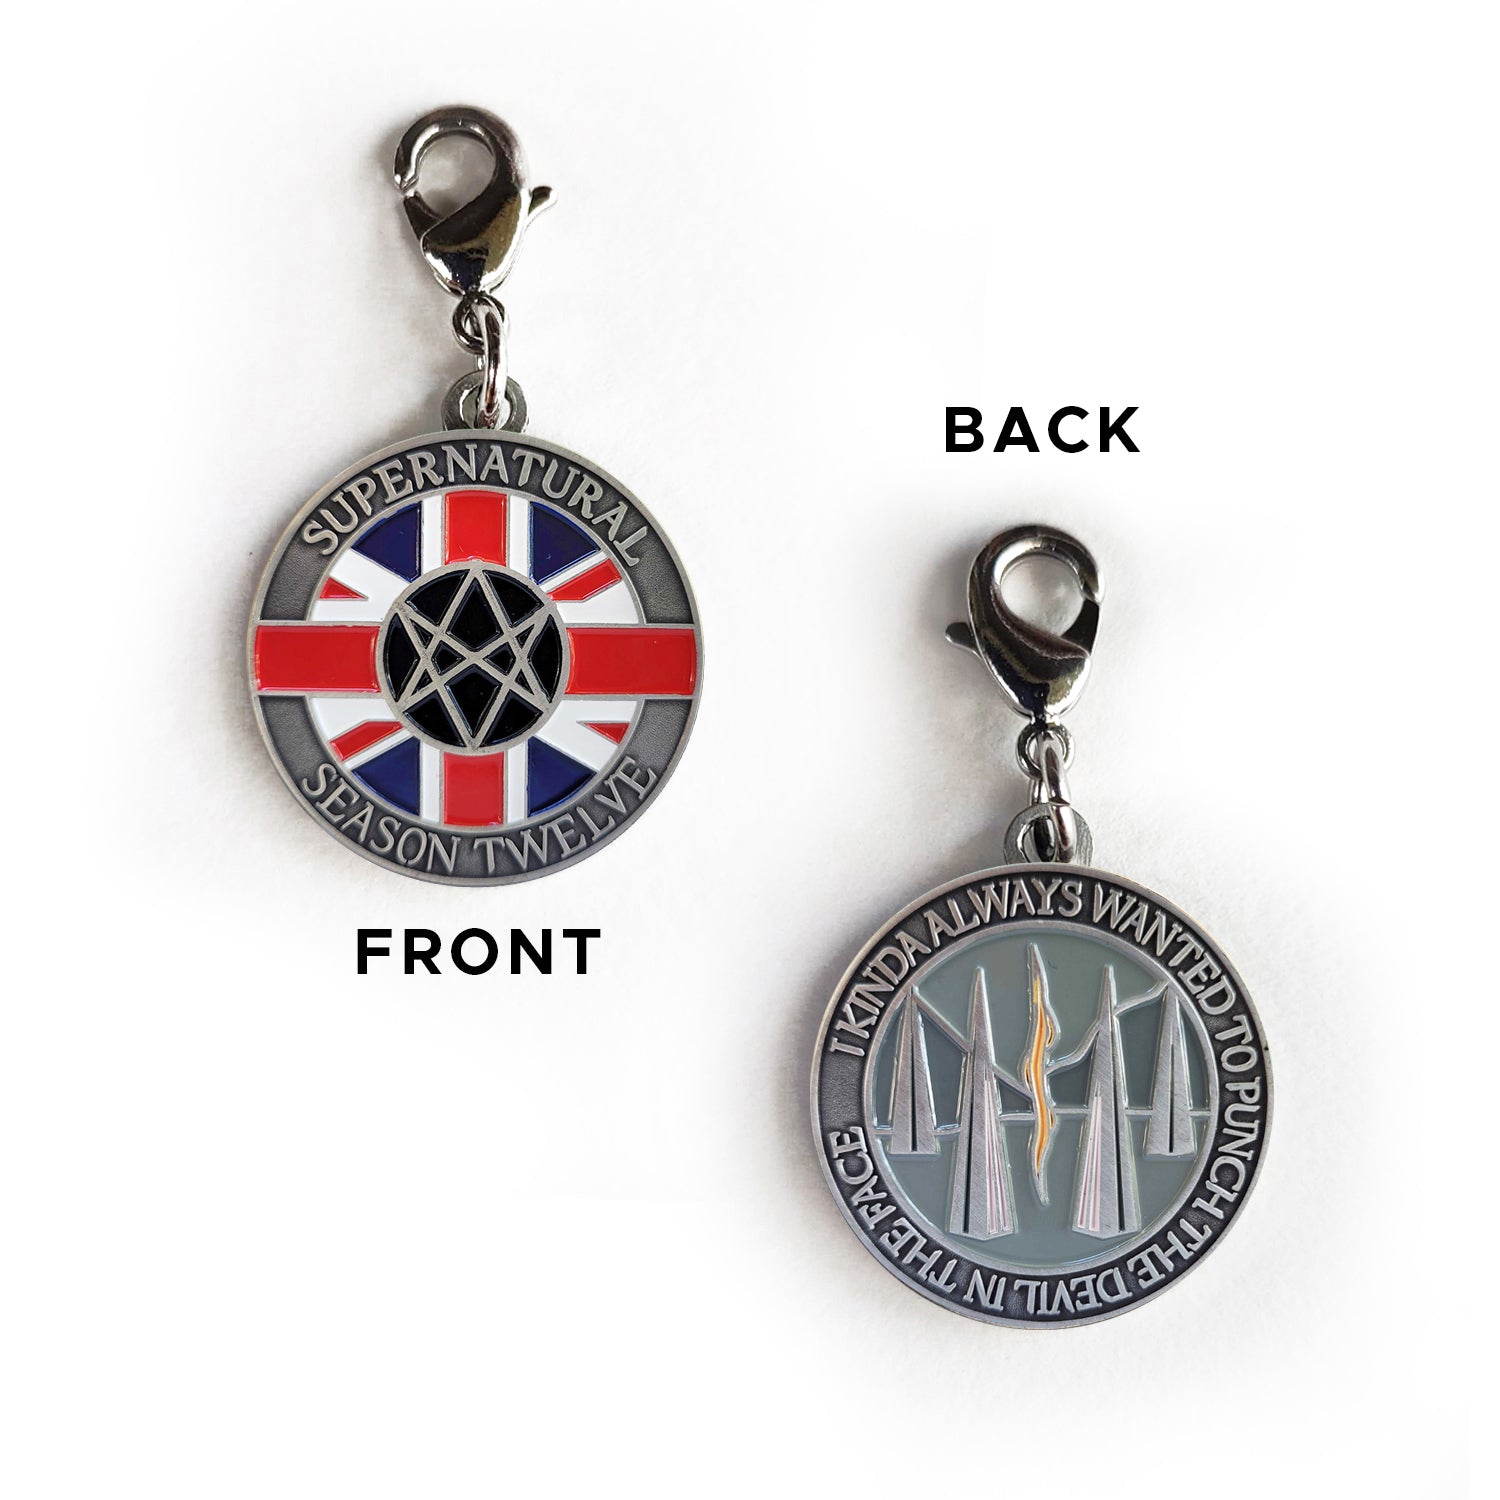 A front and back image of a brass charm. On the front are raised letters around the edge saying “Supernatural season Twelve.” In the middle is a red, white, and blue Union Jack flag, with a Men Of Letters symbol at the center. On the back of the coin are raised letters around the edge saying “I kinda always wanted to punch the devil in the face.” In the middle is are tall triangles rising from a grey background, with a read and yellow line down the center.